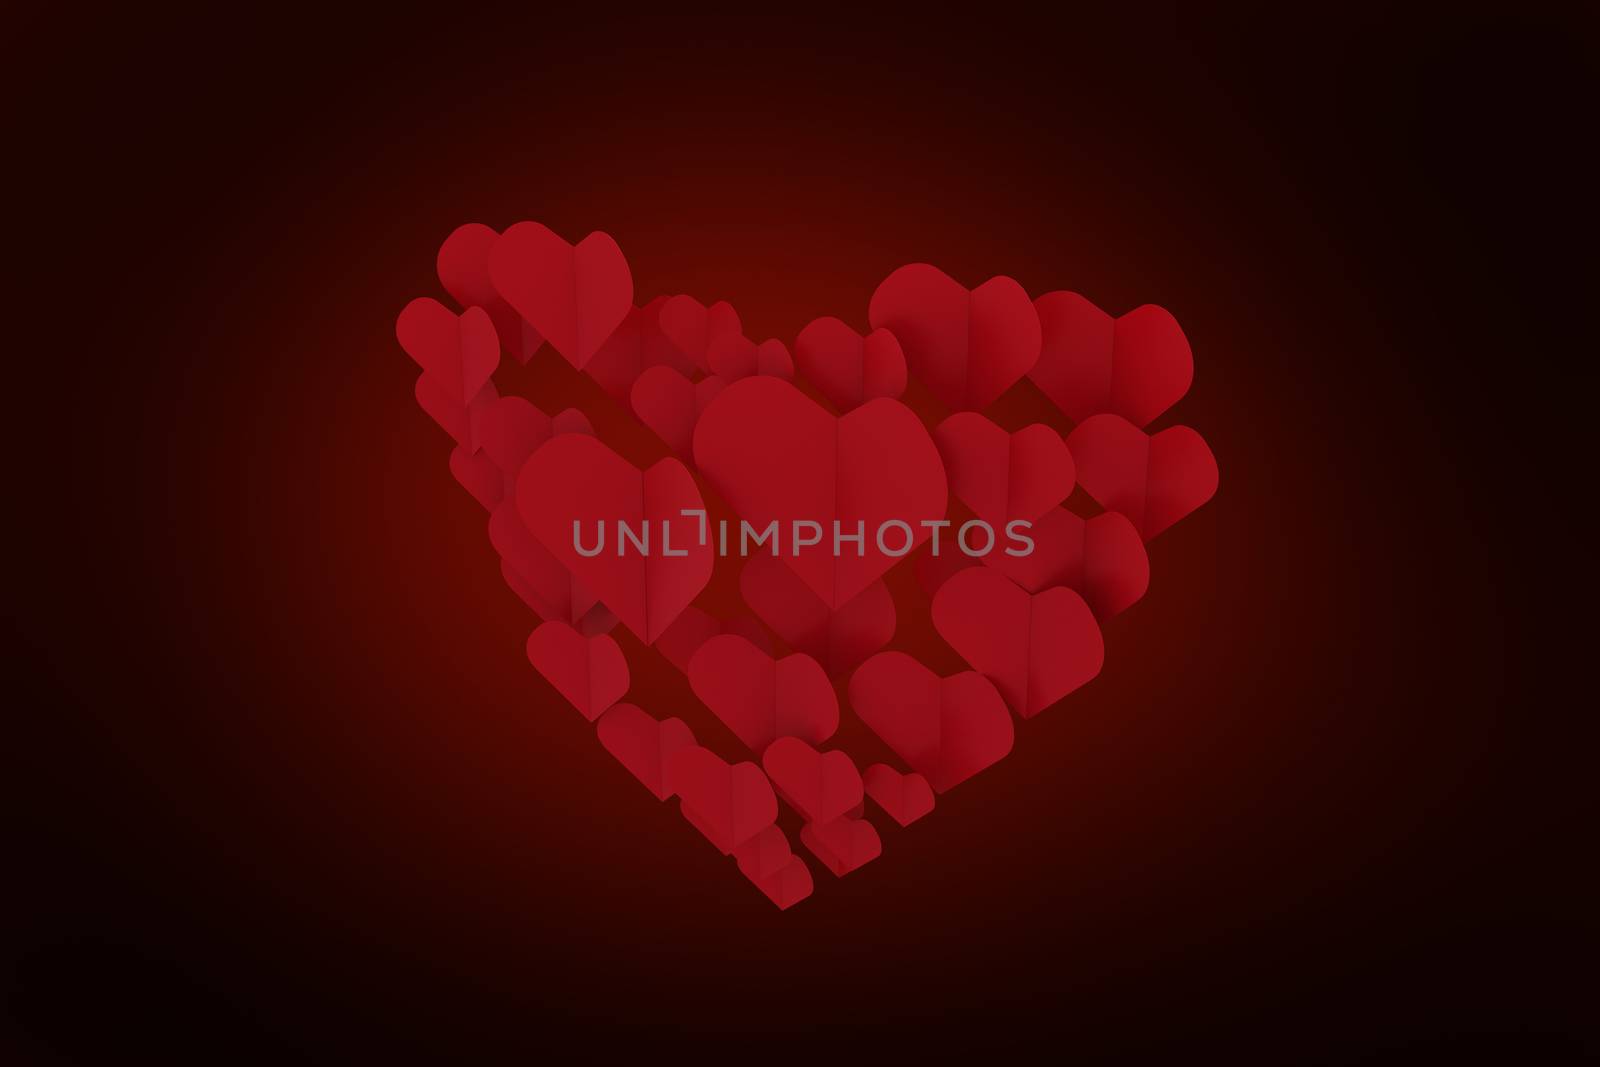 Love hearts against red background with vignette